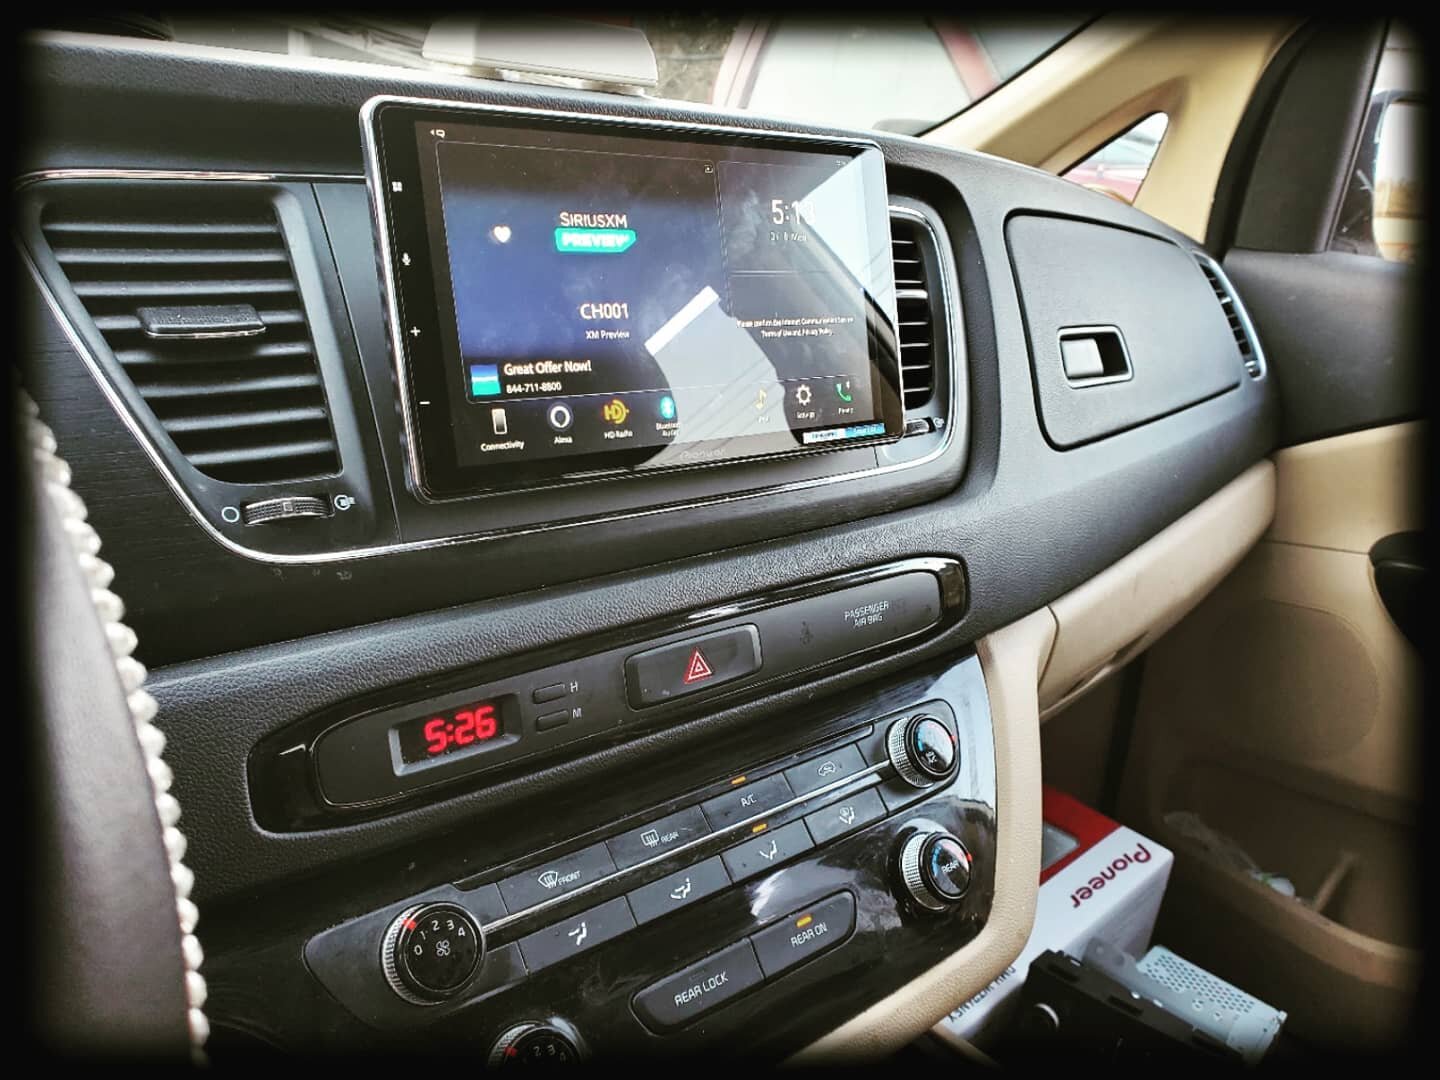 Check out the new Pioneer DMH-WT76NEX 9&quot; Floating screen !

#mecp #mobileelectronics #installer #12volt #happycustomer #newjersey #southjersey #business #pioneercaraudio #pioneer #alexaautomotive #alexa #hotspot #carplay #androidauto